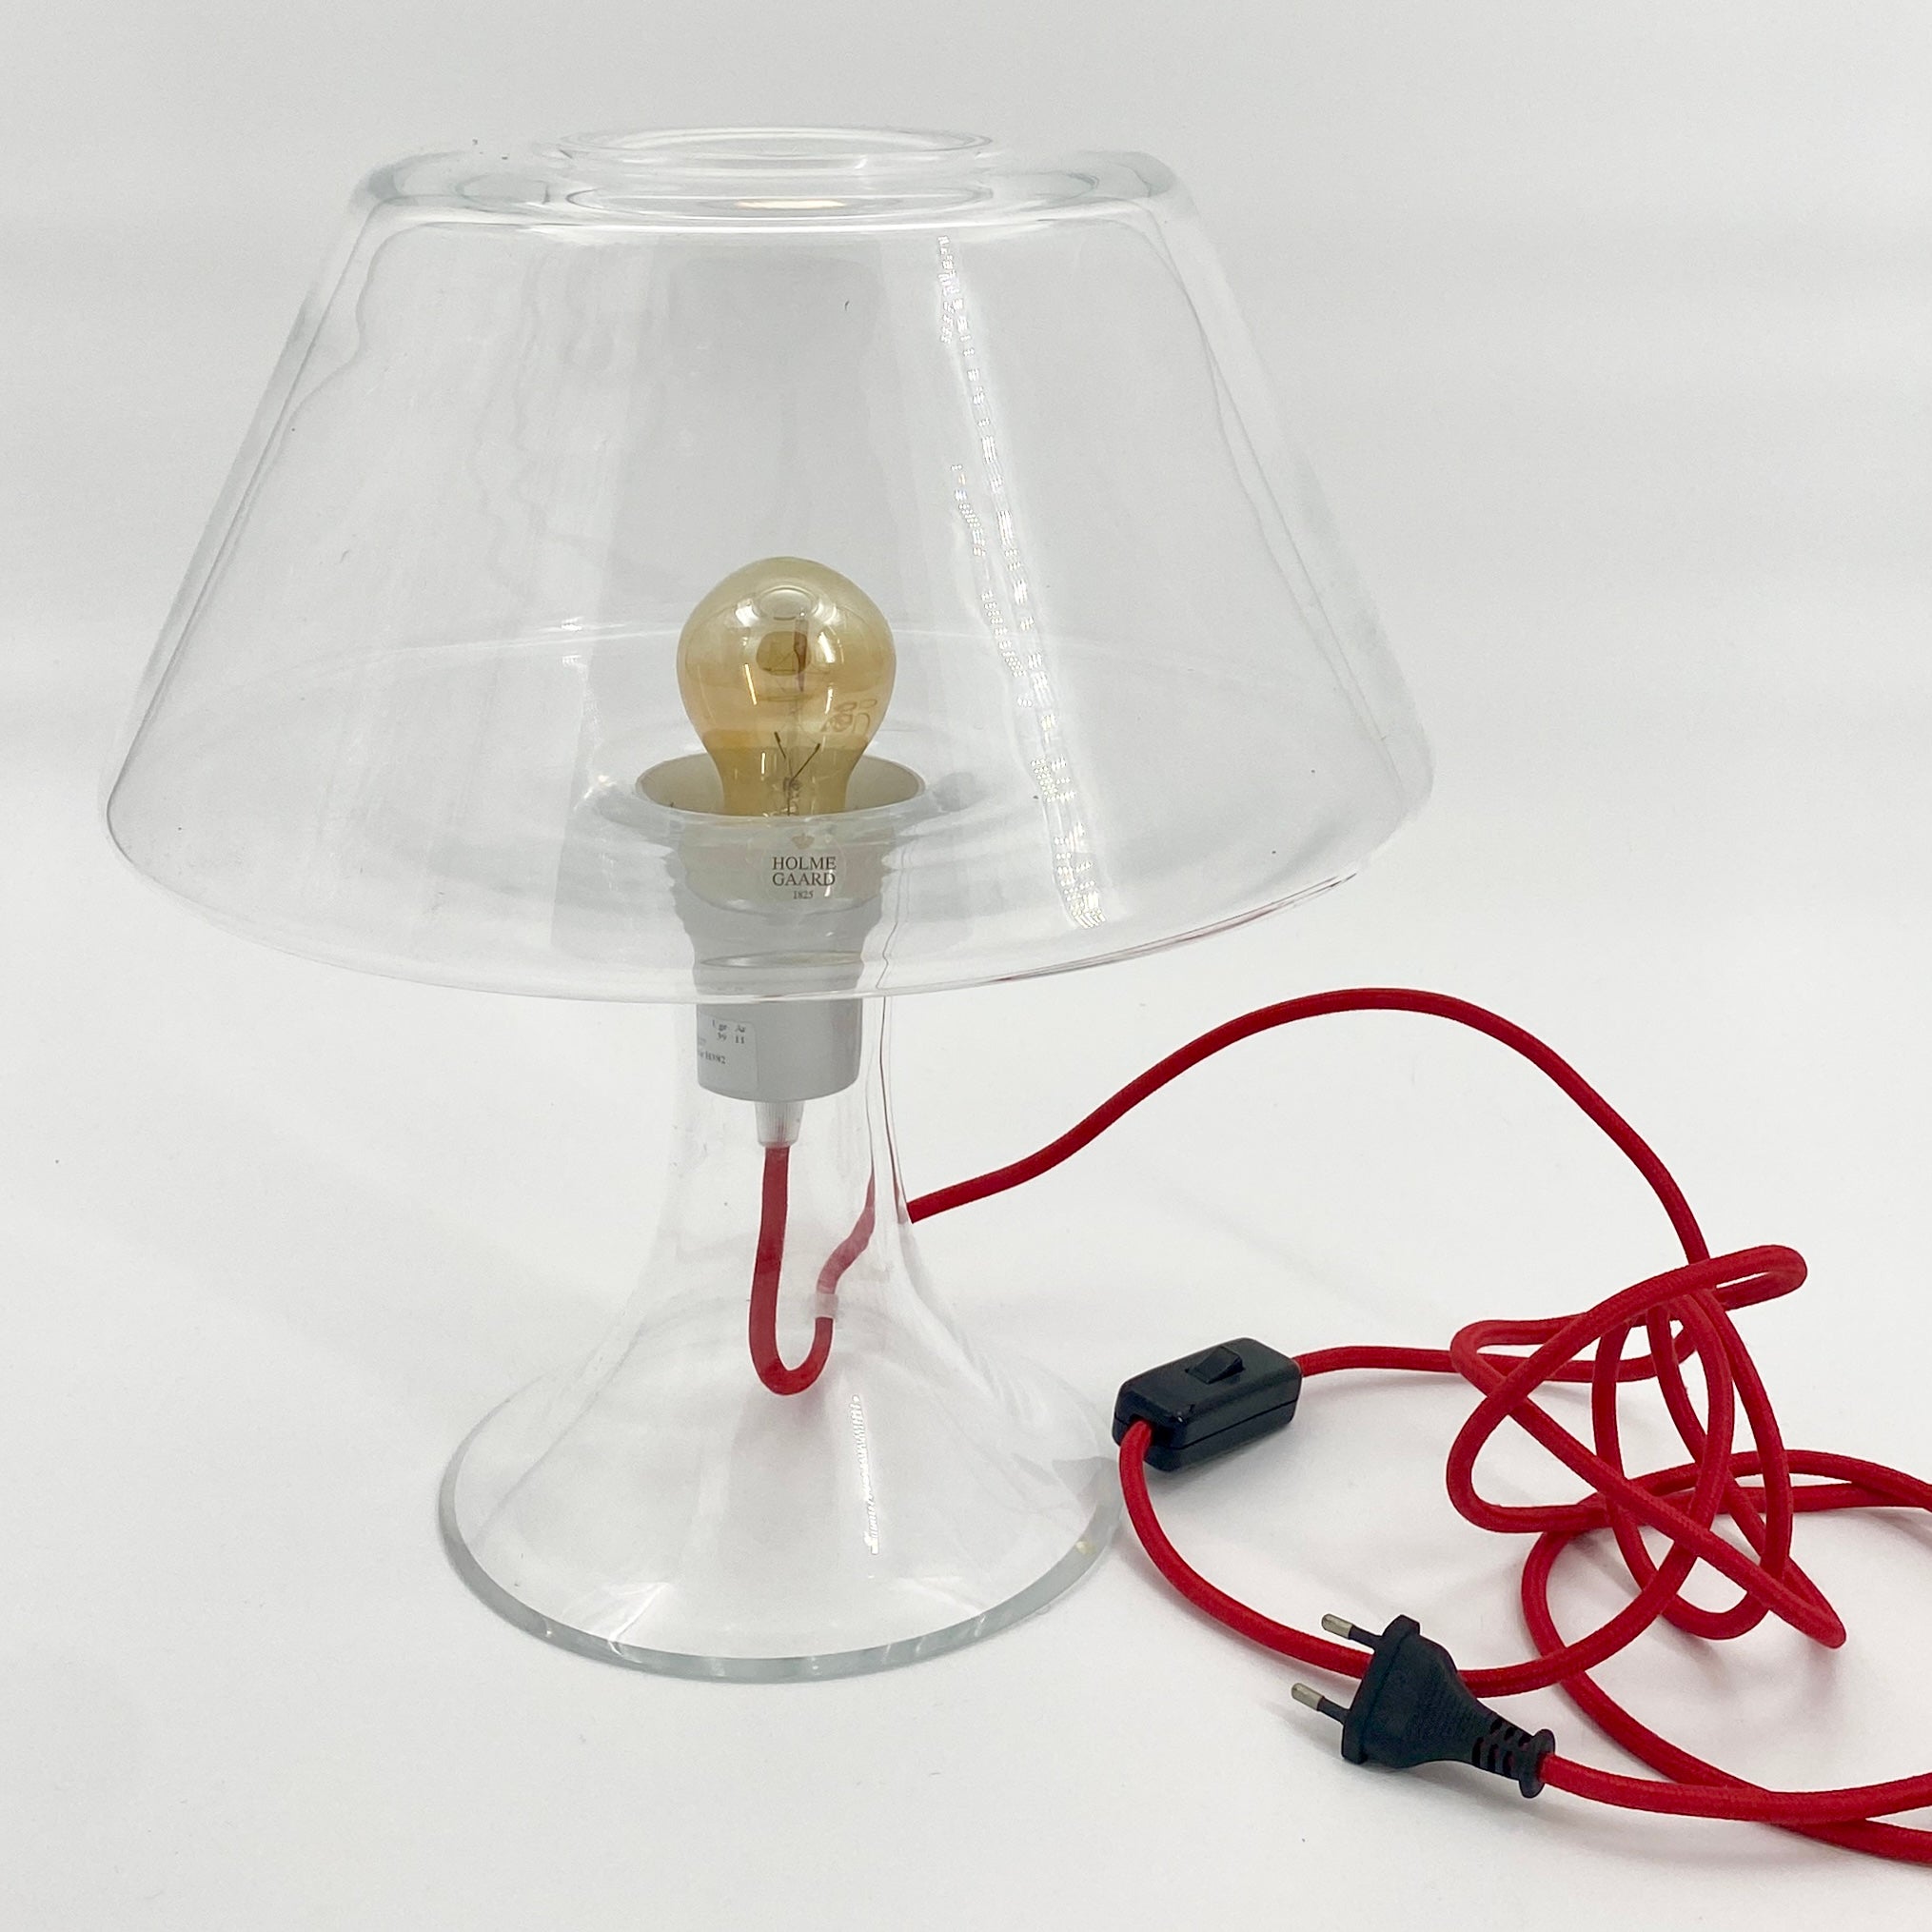 This pair of Danish Modern clear glass shade and table lamps Are Designed By Maria Berntsen for Holmegaard.

This 